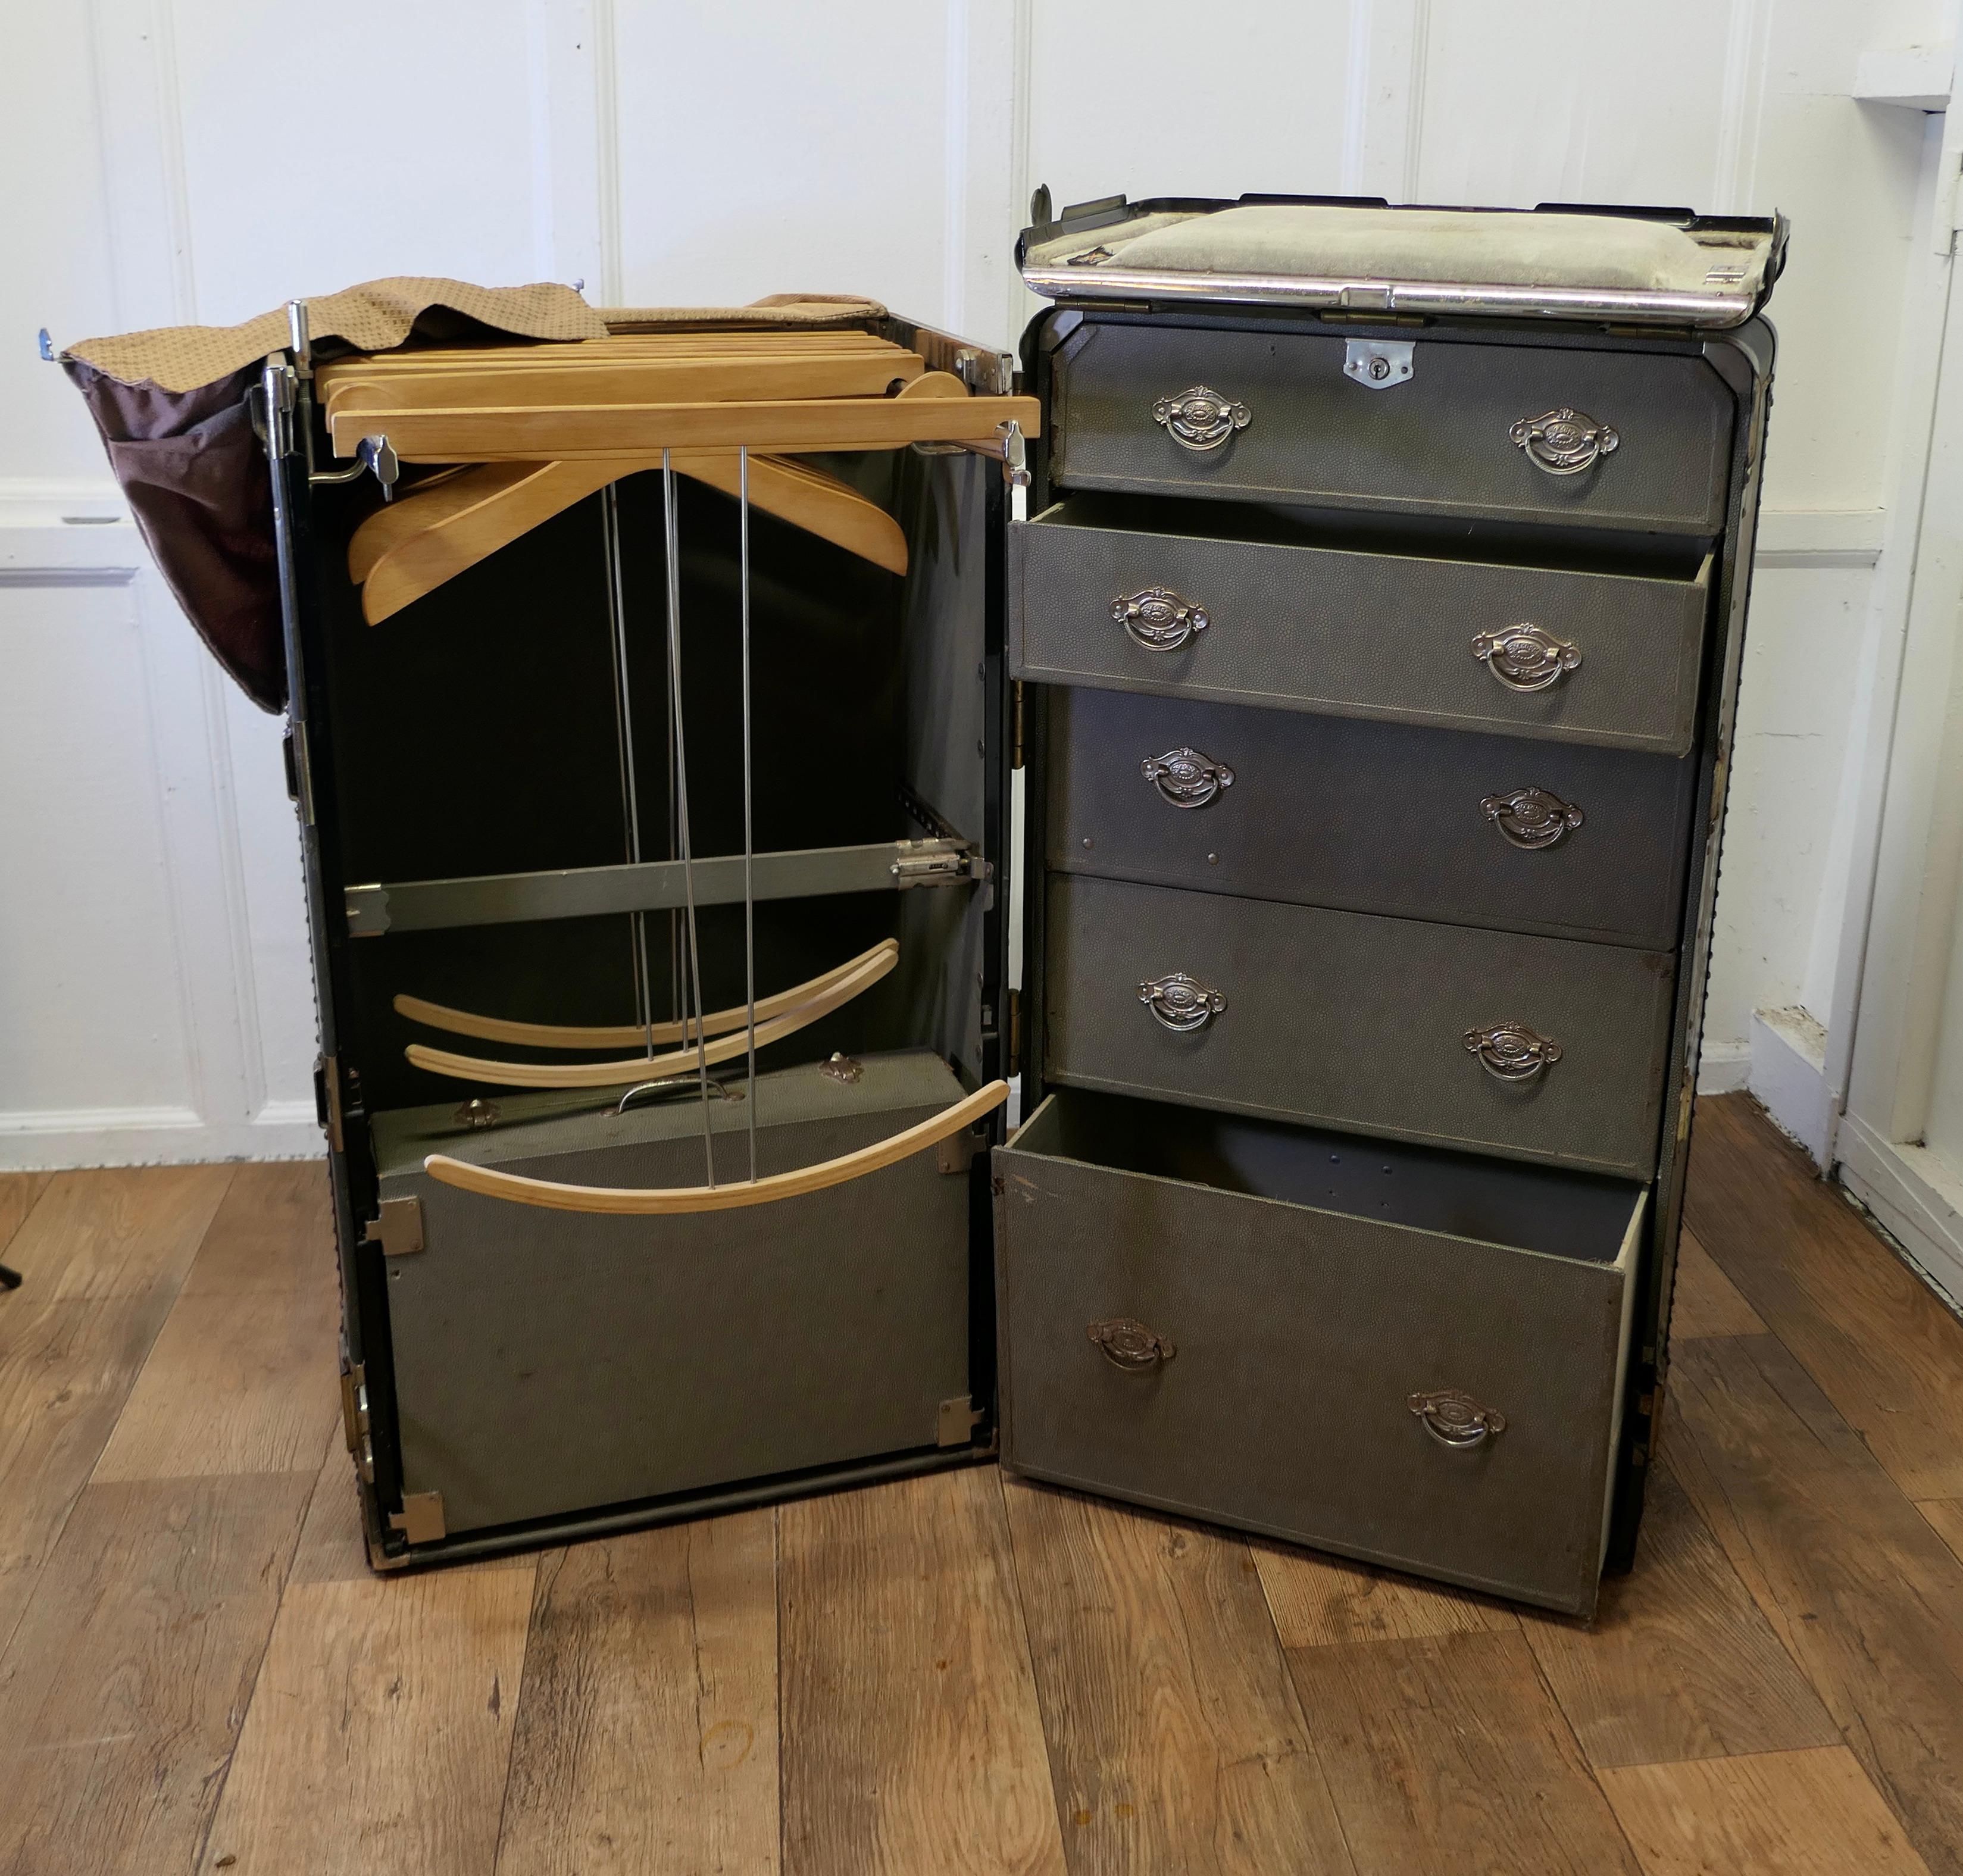 Art Deco Steamer Trunk or Cabin Wardrobe by Hartman Luggage Co.

Early 20th Century Estate Wardrobe Trunk from Beckets Leather Goods Company Washington DC
The trunk is complete it opens out fully to access 5 drawers on one side and a wardrobe